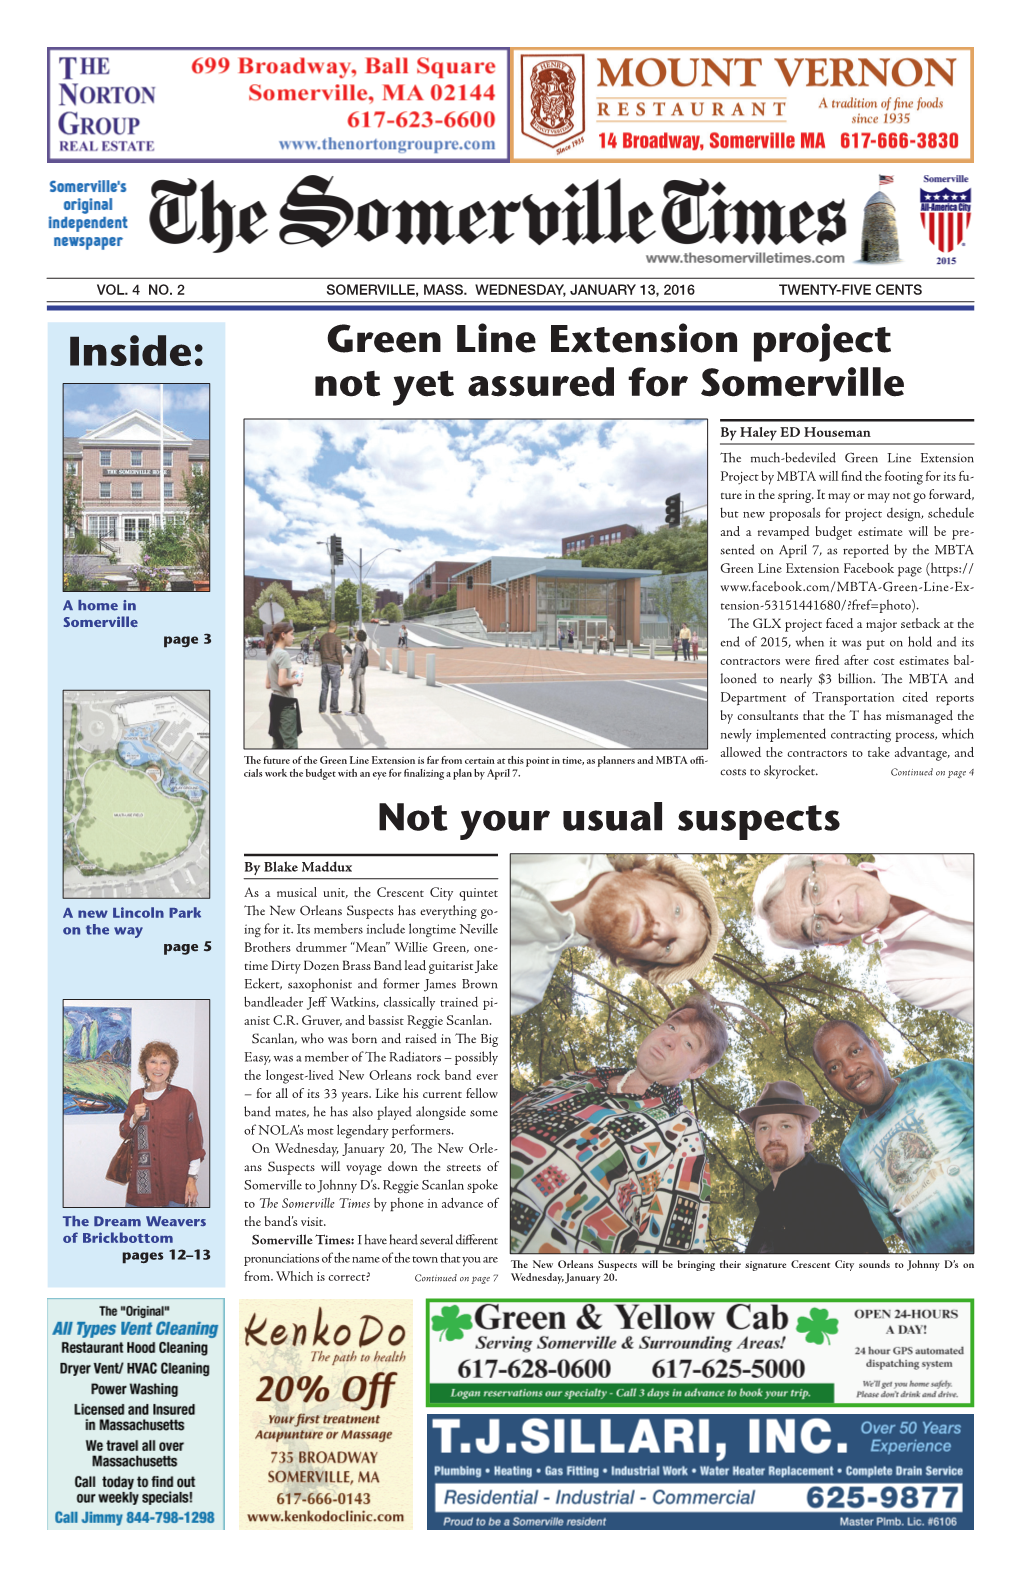 Green Line Extension Project Not Yet Assured for Somerville